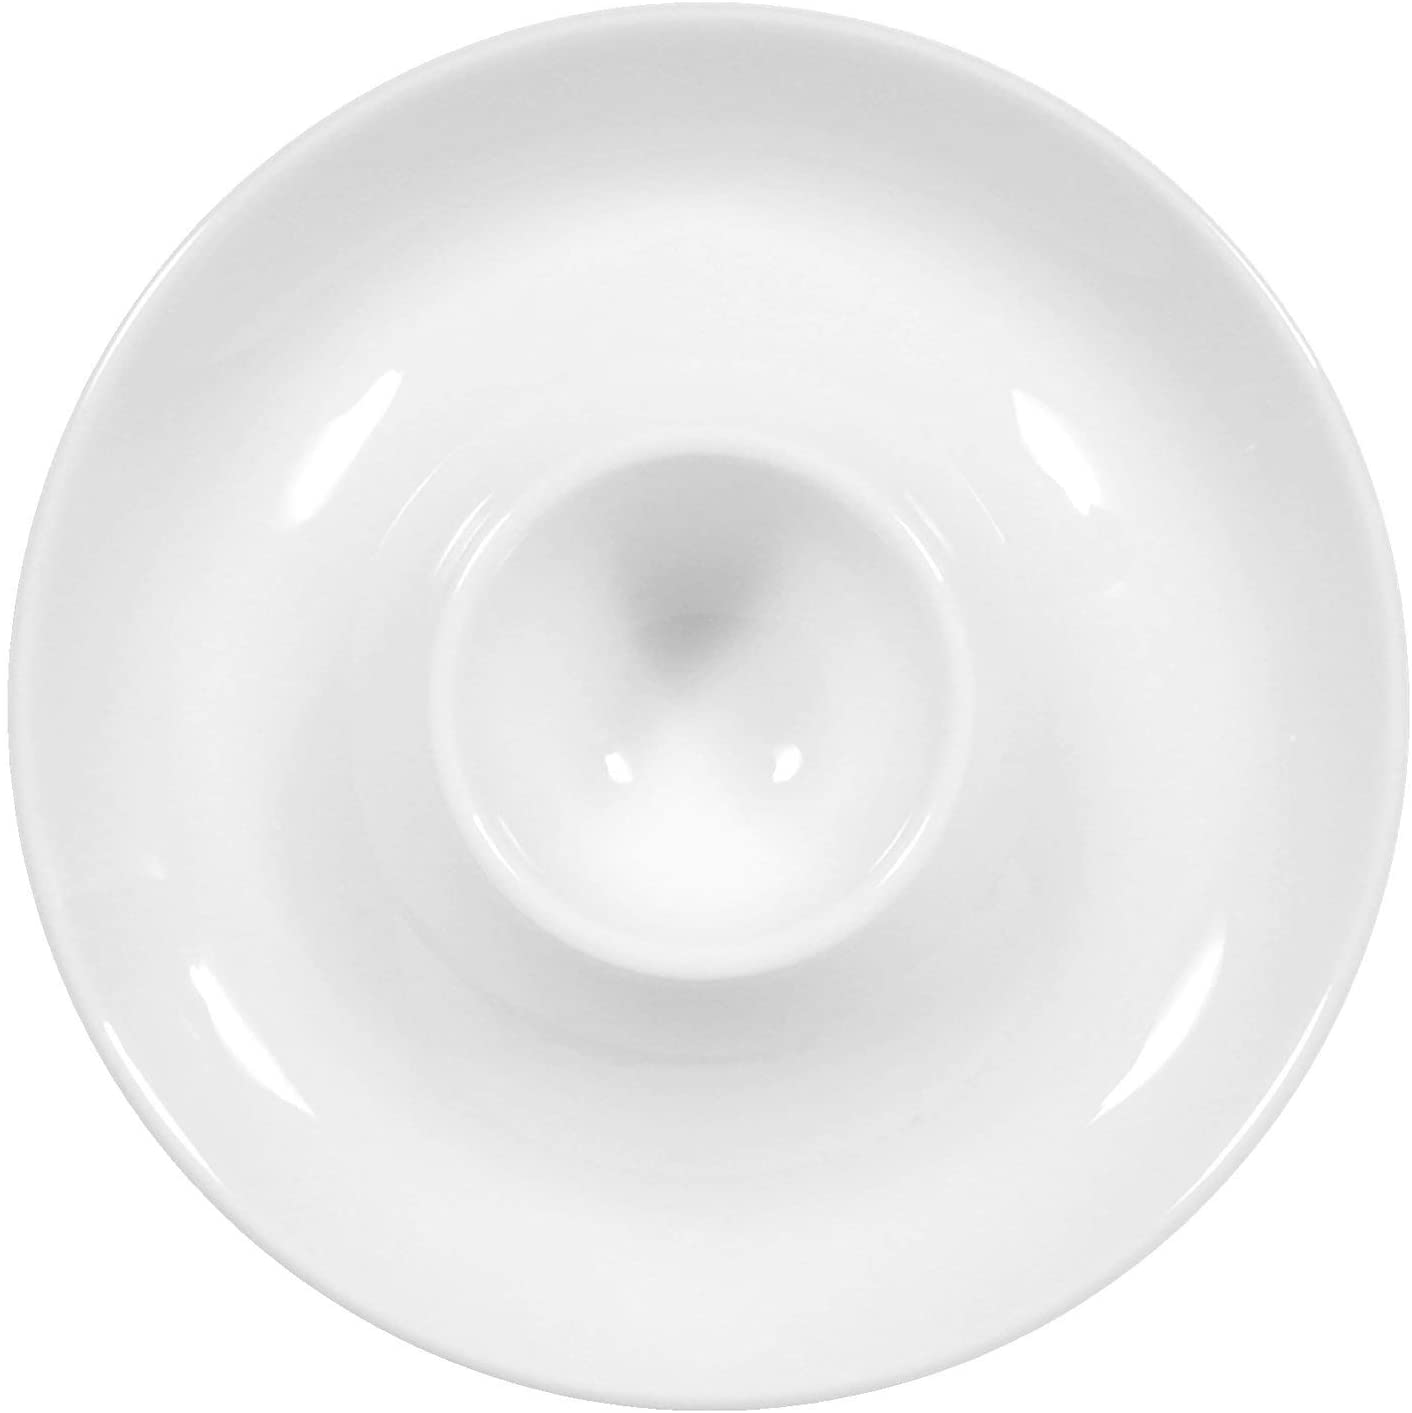 Seltmann Weiden Compact Egg Cup with Tray, Egg Holder, Porcelain, White, Dishwasher Safe, 1458671